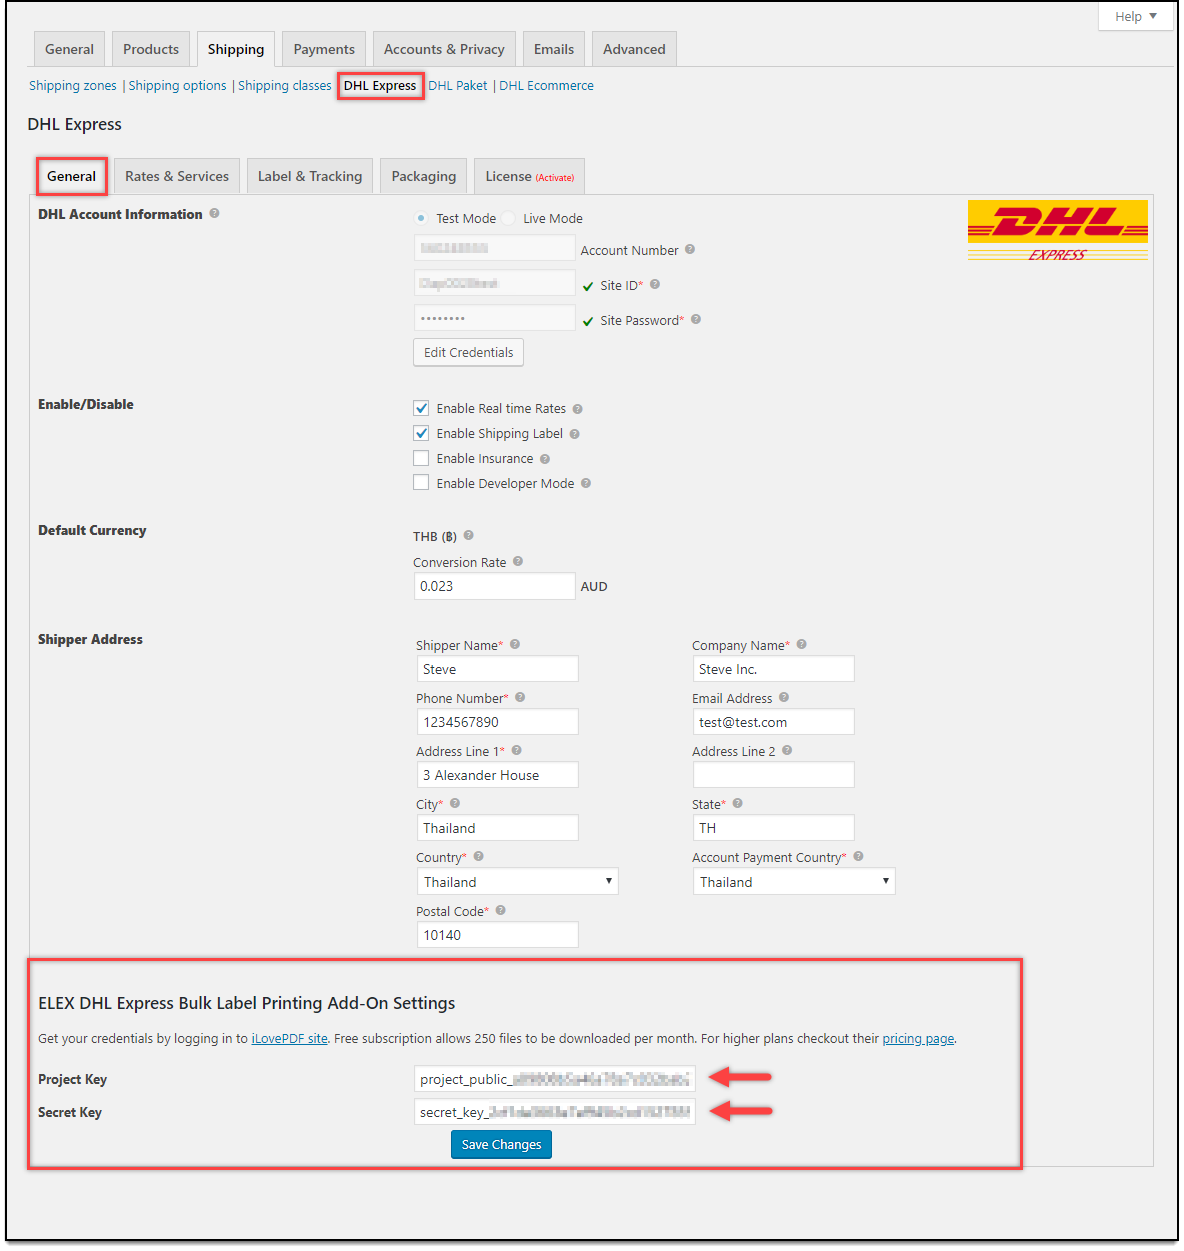 WooCommerce DHL Express Bulk Label Printing Add-On | Project and Secret Key in the plugin